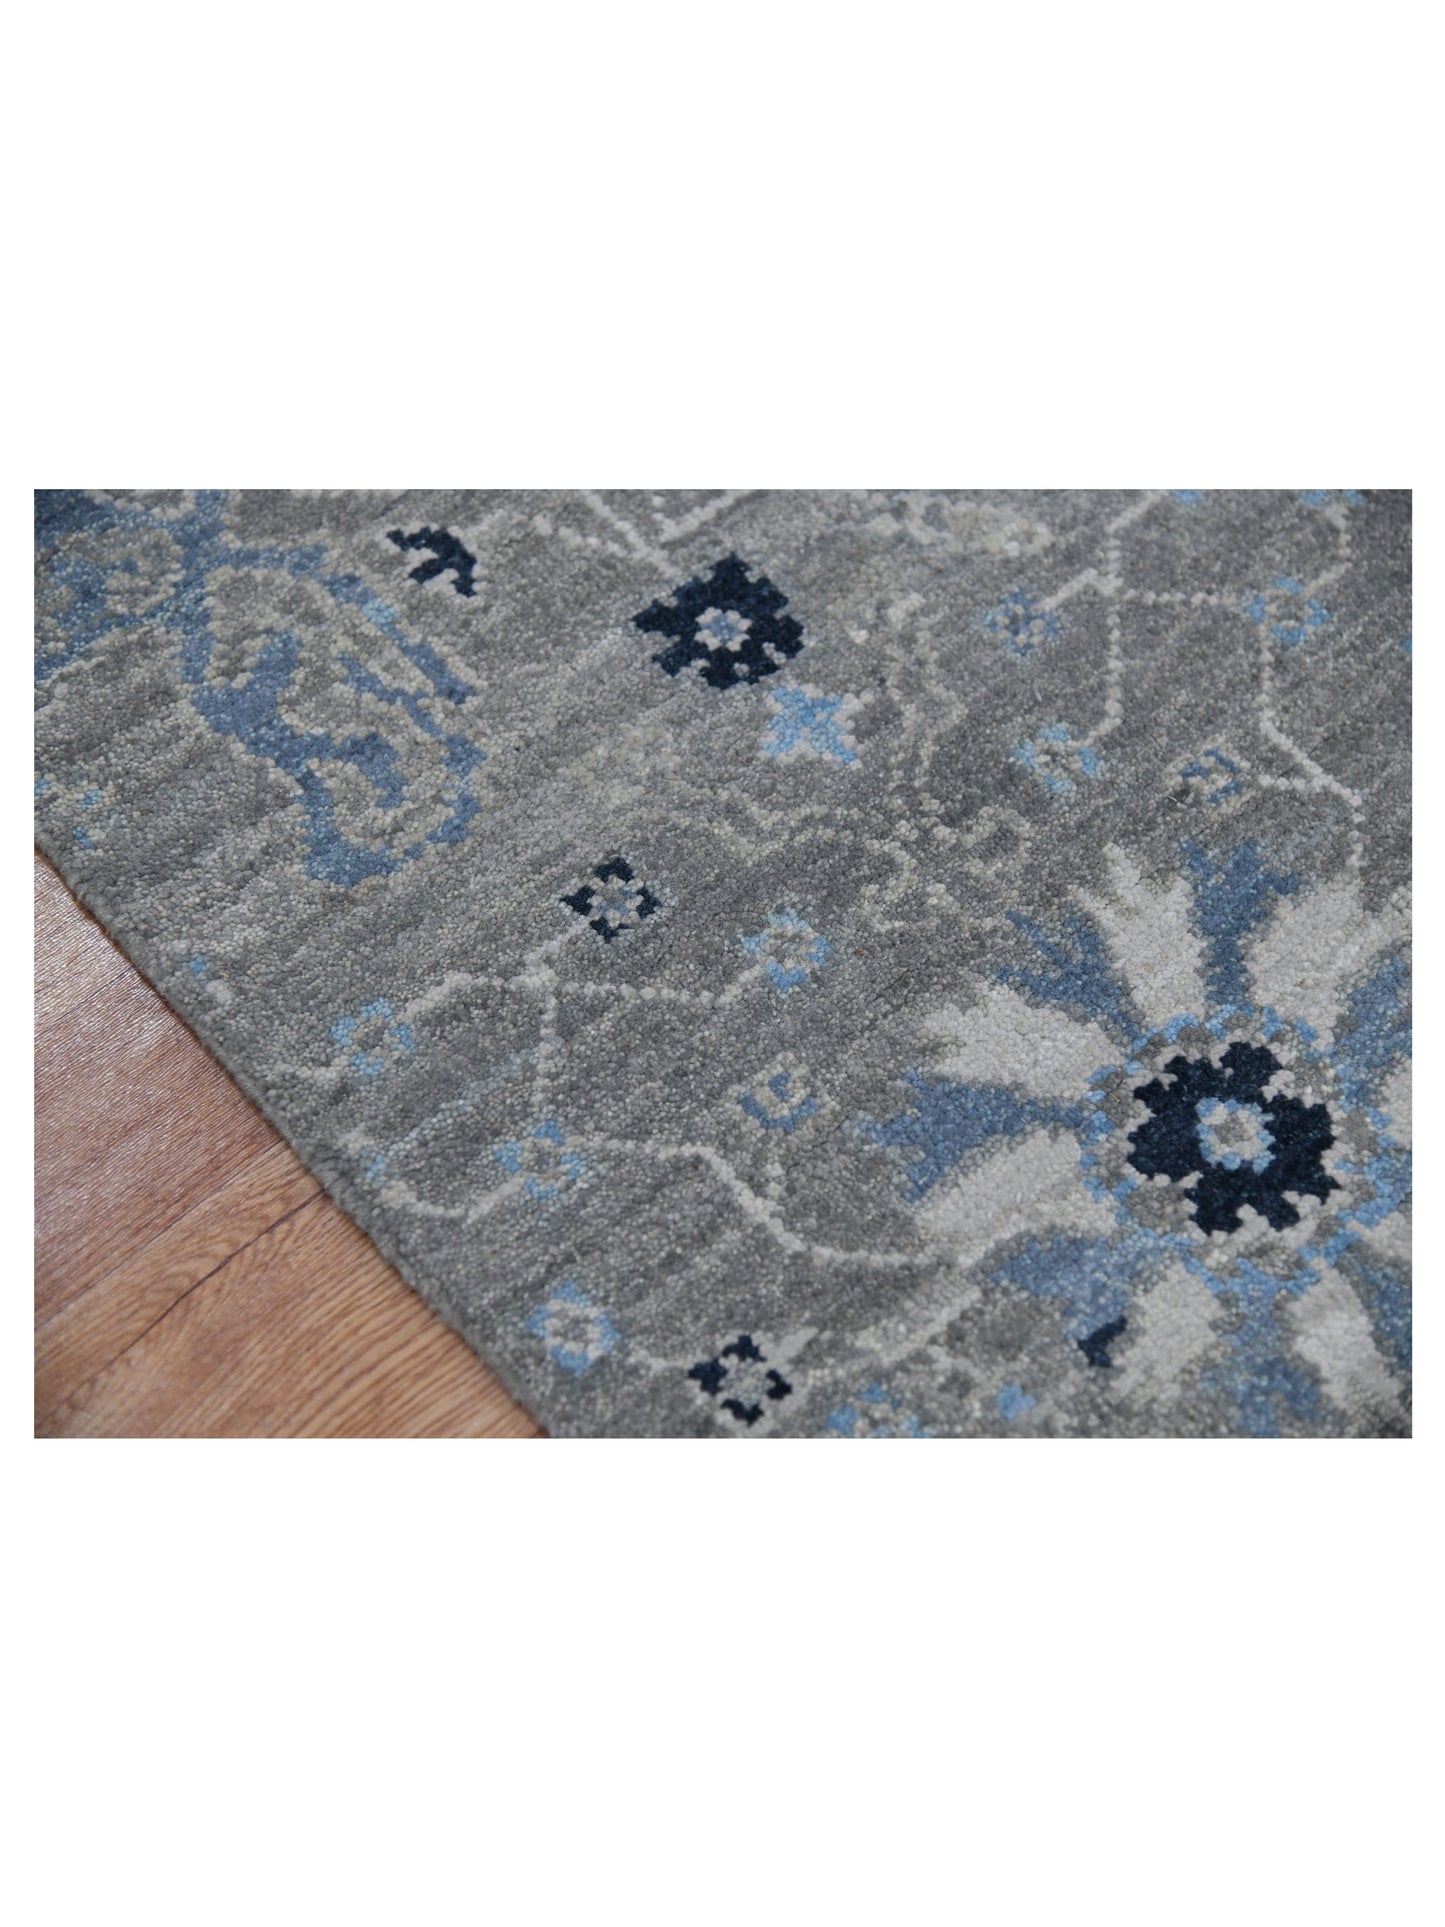 Limited Bailee BNS-200 SILVER SAND Traditional Knotted Rug